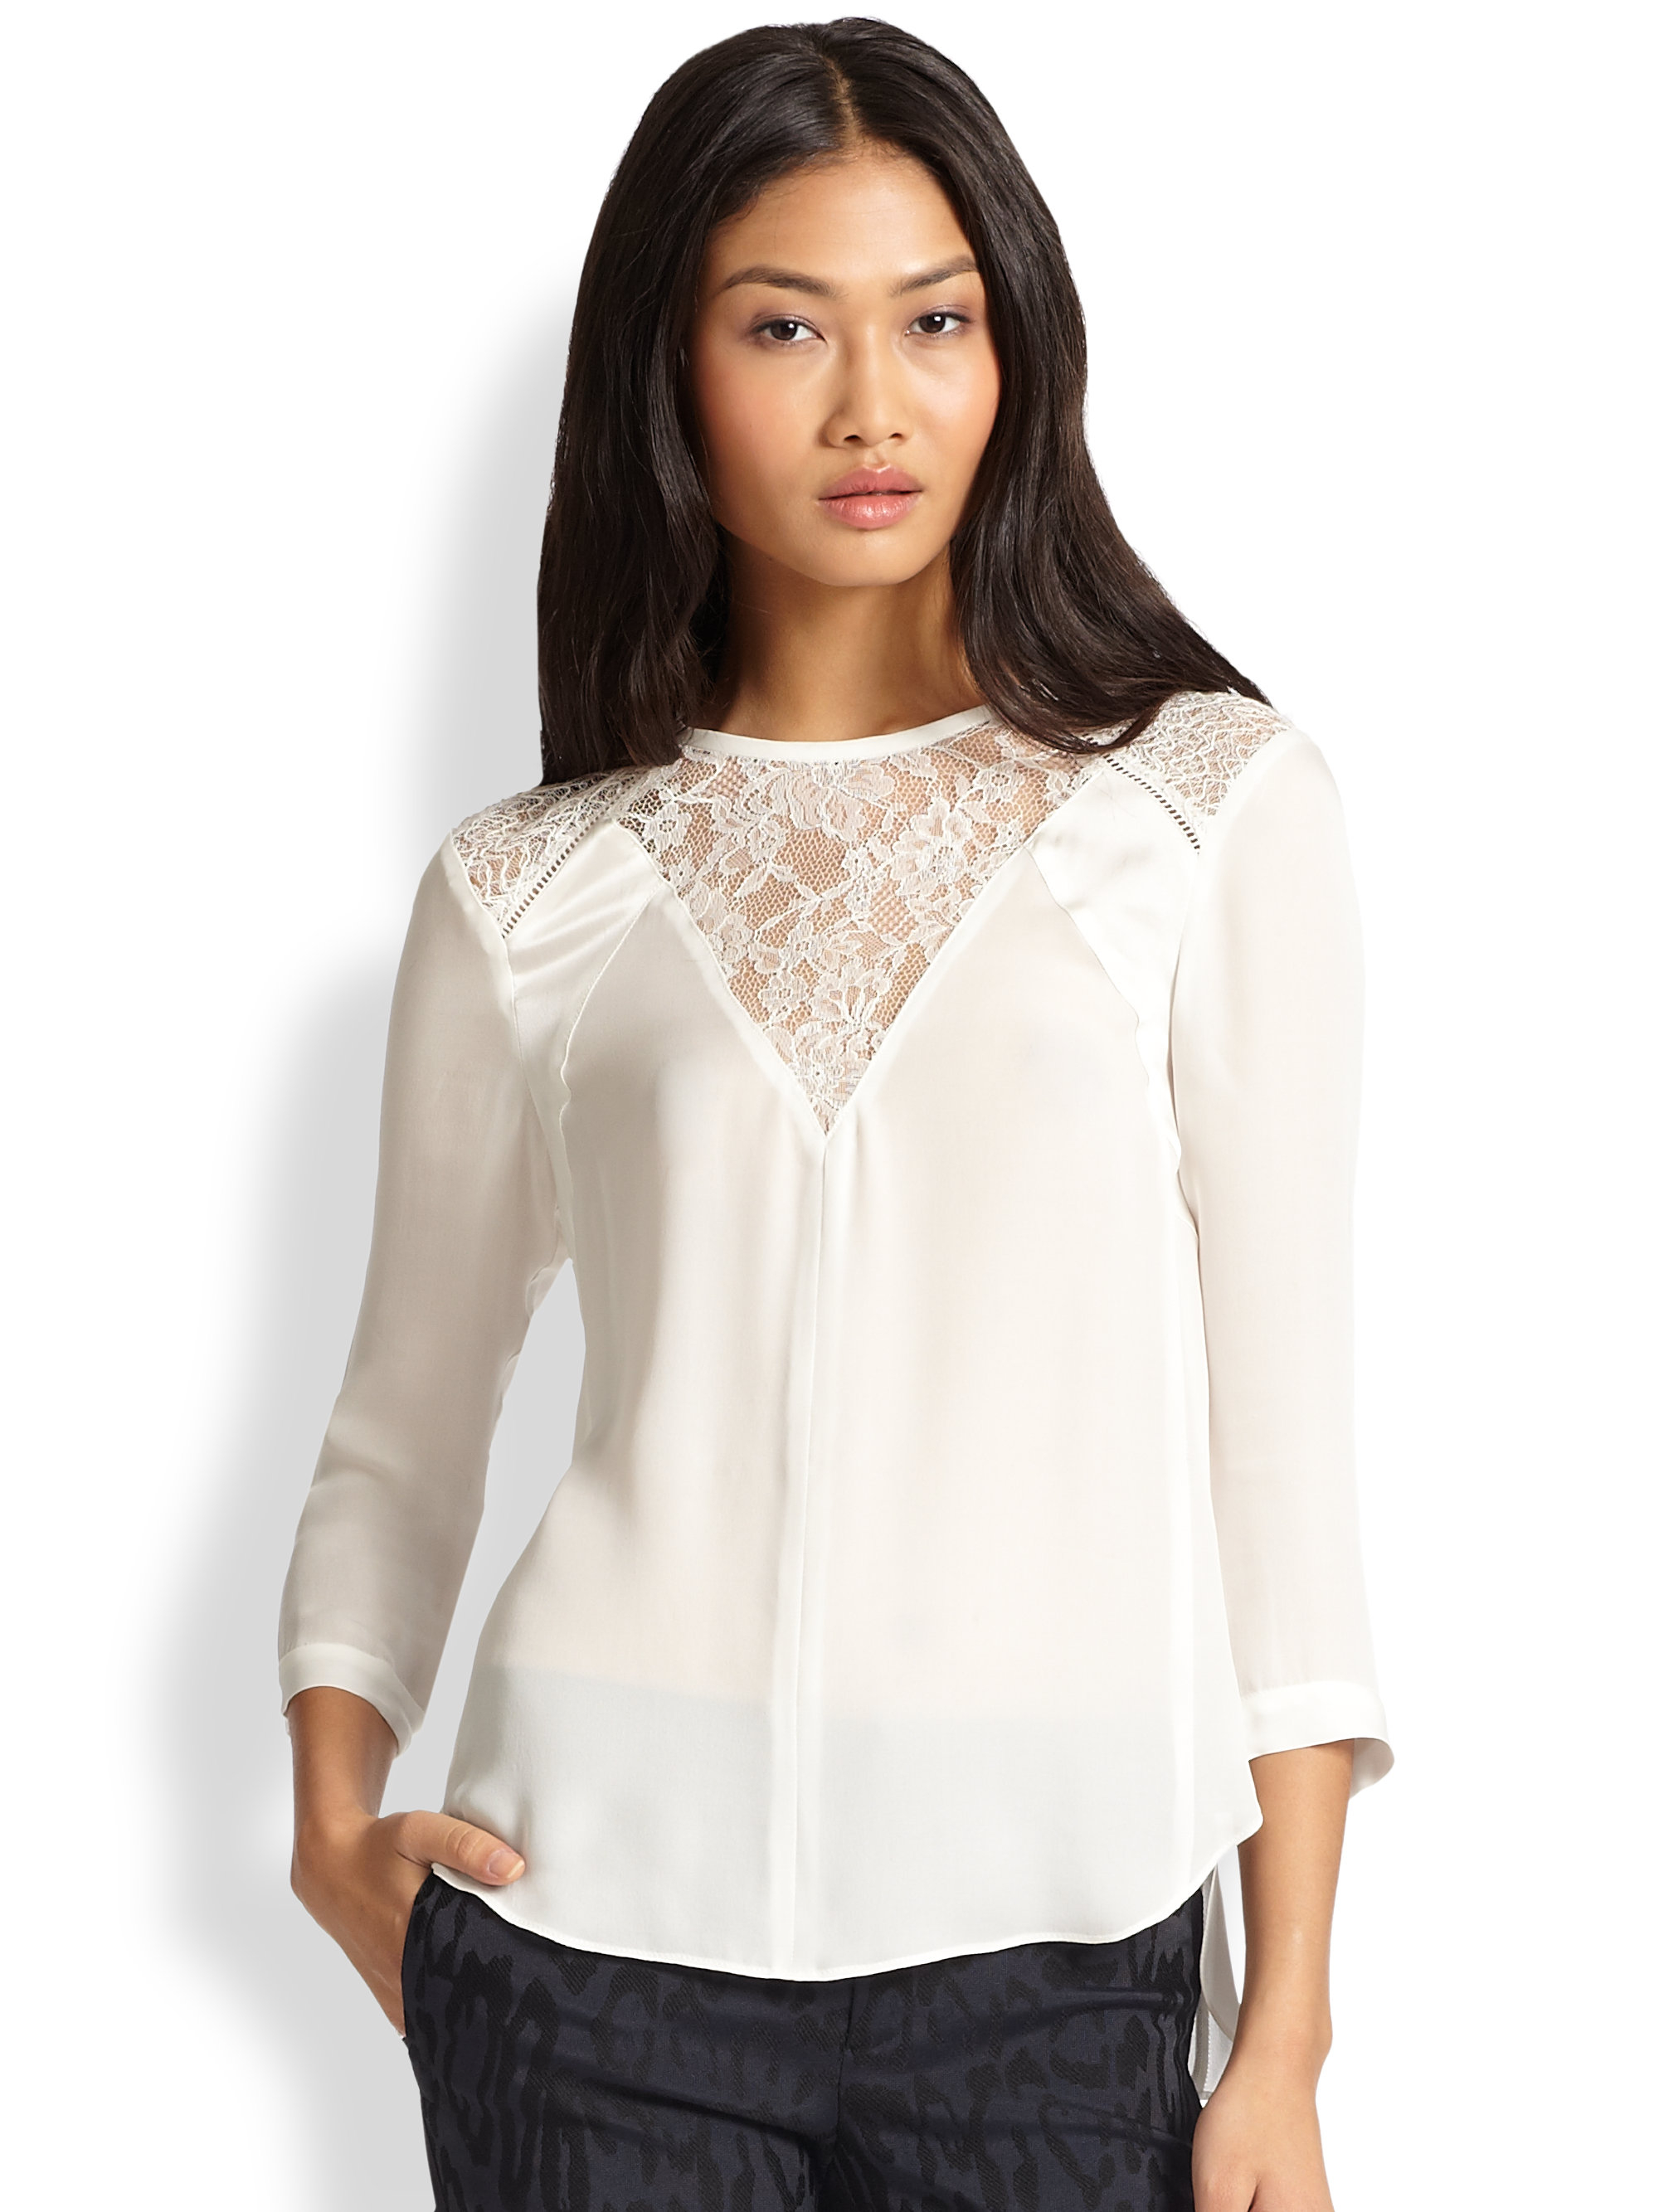 Lyst - Rebecca Taylor Lace-Paneled Silk Blouse in White